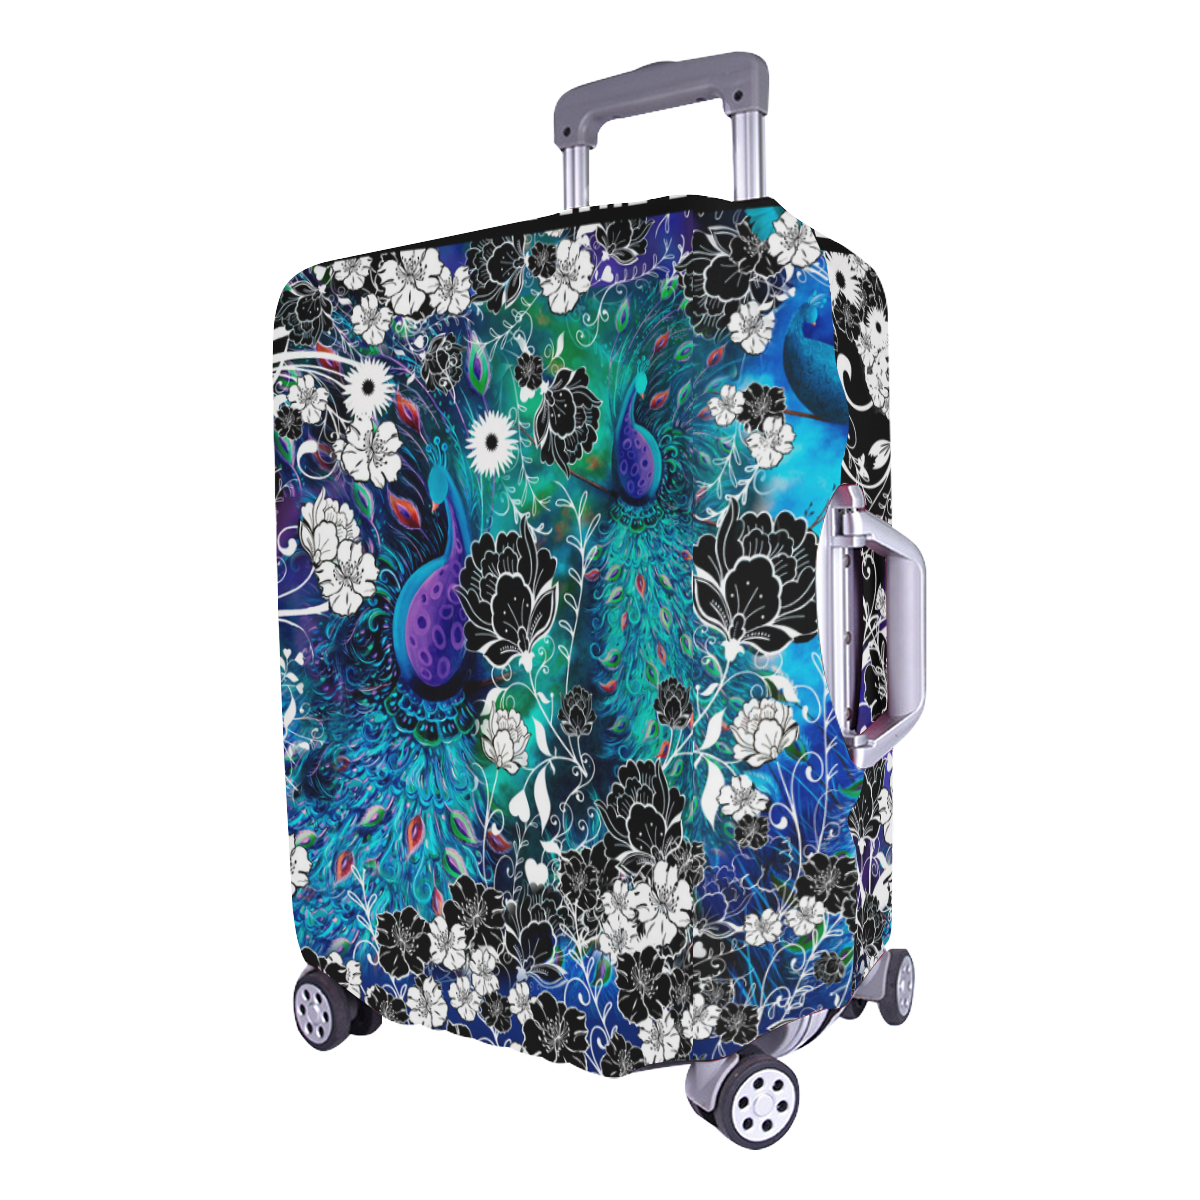 Luggage Cover Peacock Flower Juleez Luggage Cover/Large 26"-28"